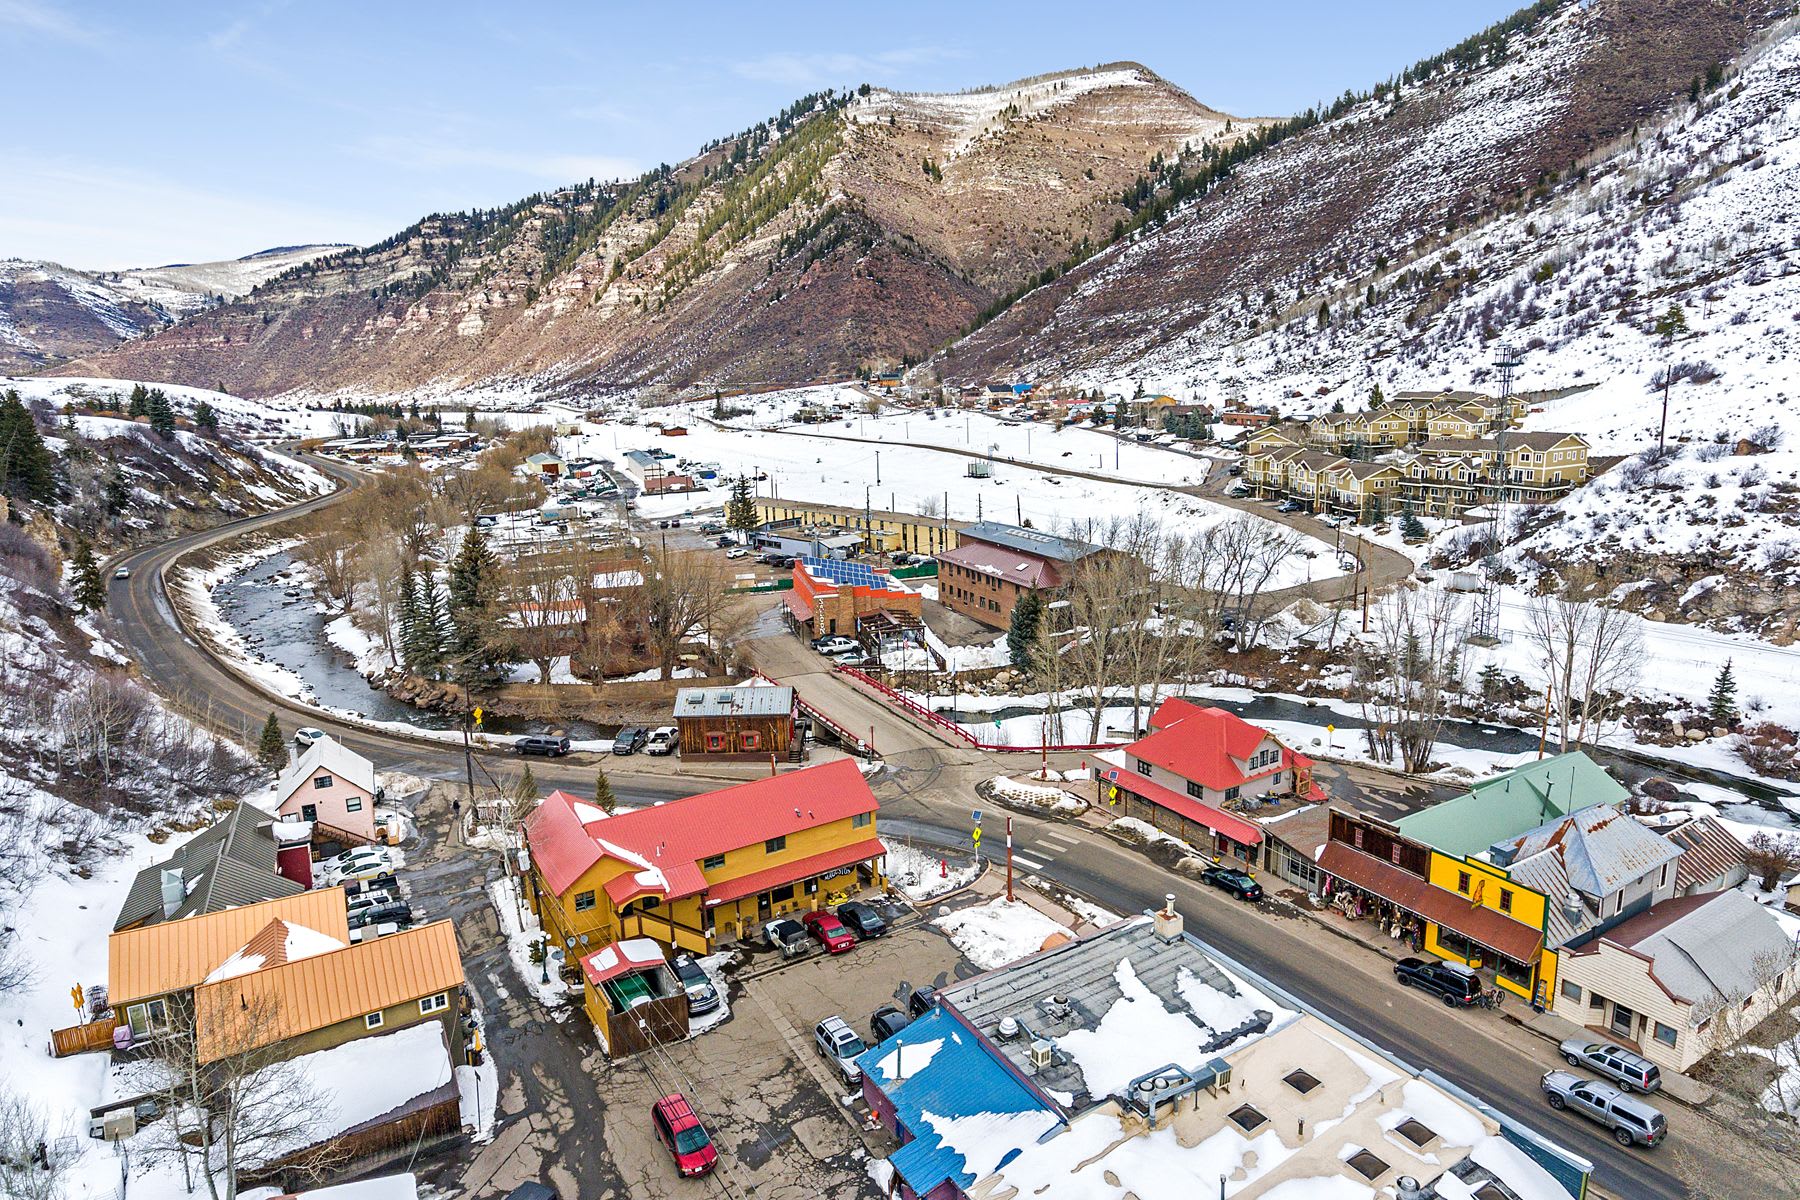 Minturn and Red cliff